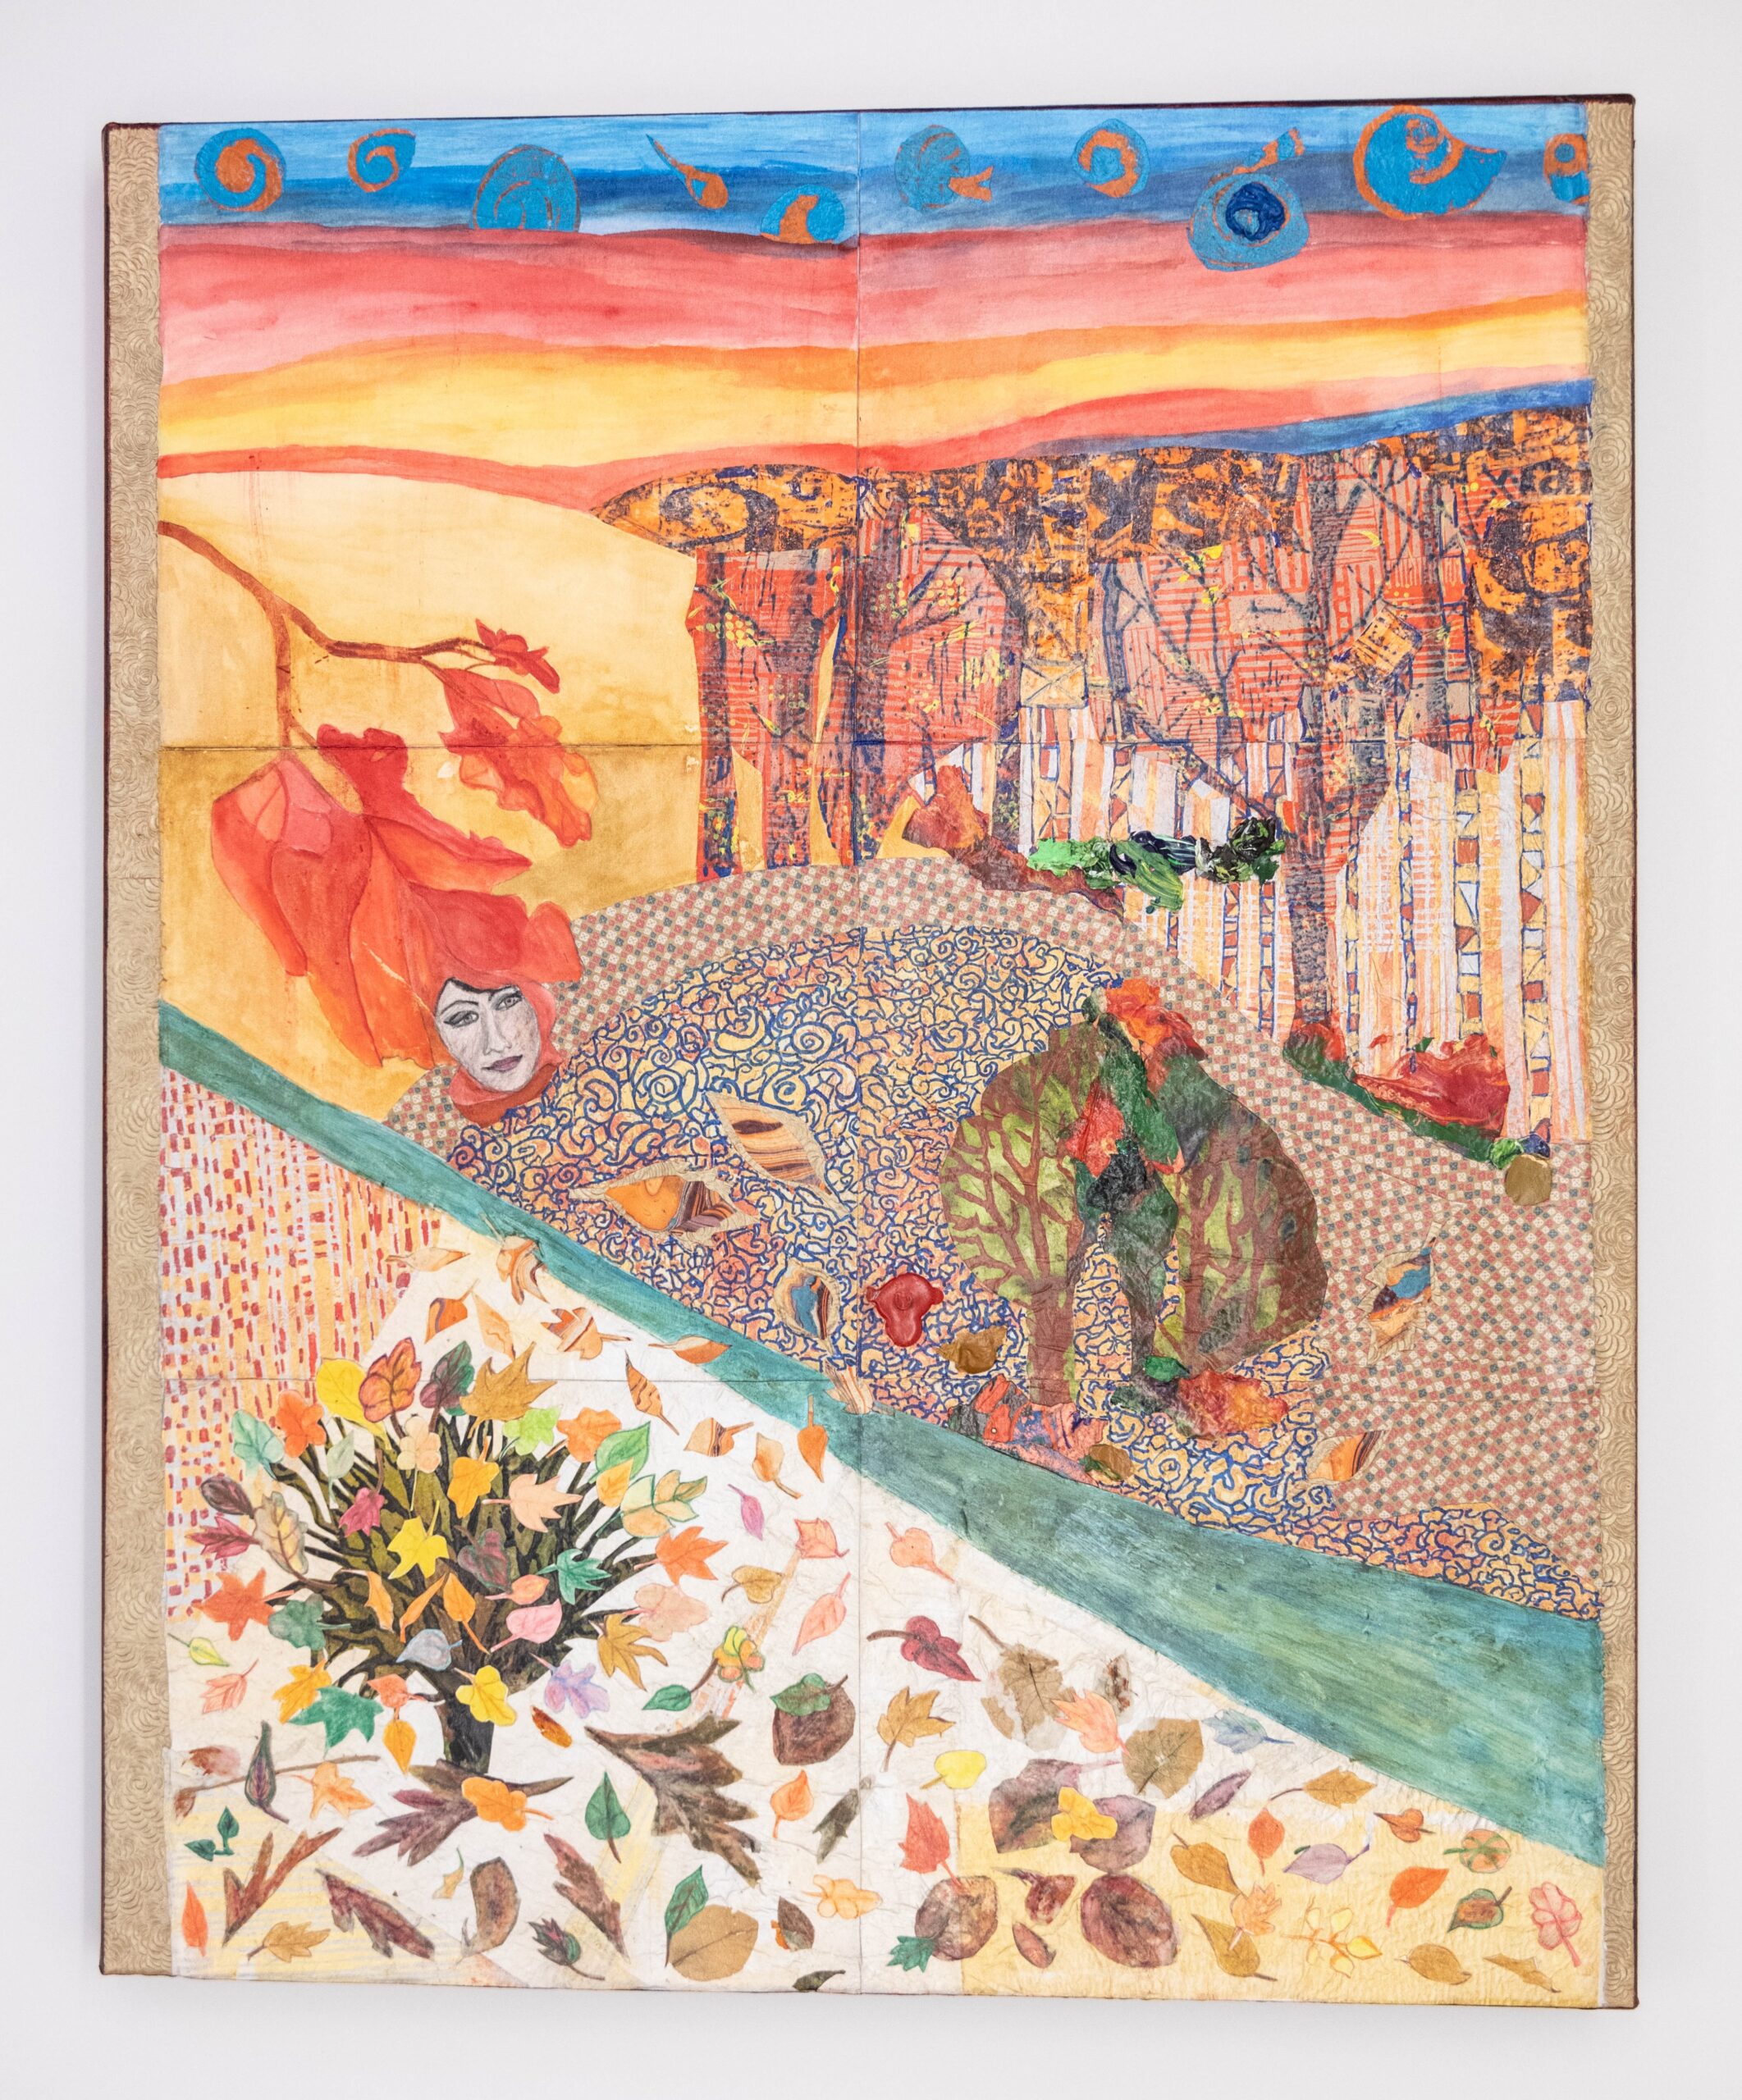 Colorful somewhat abstract painting of a landscape showing trees with falling laves and a woman's face appearing in one of the larger leaves